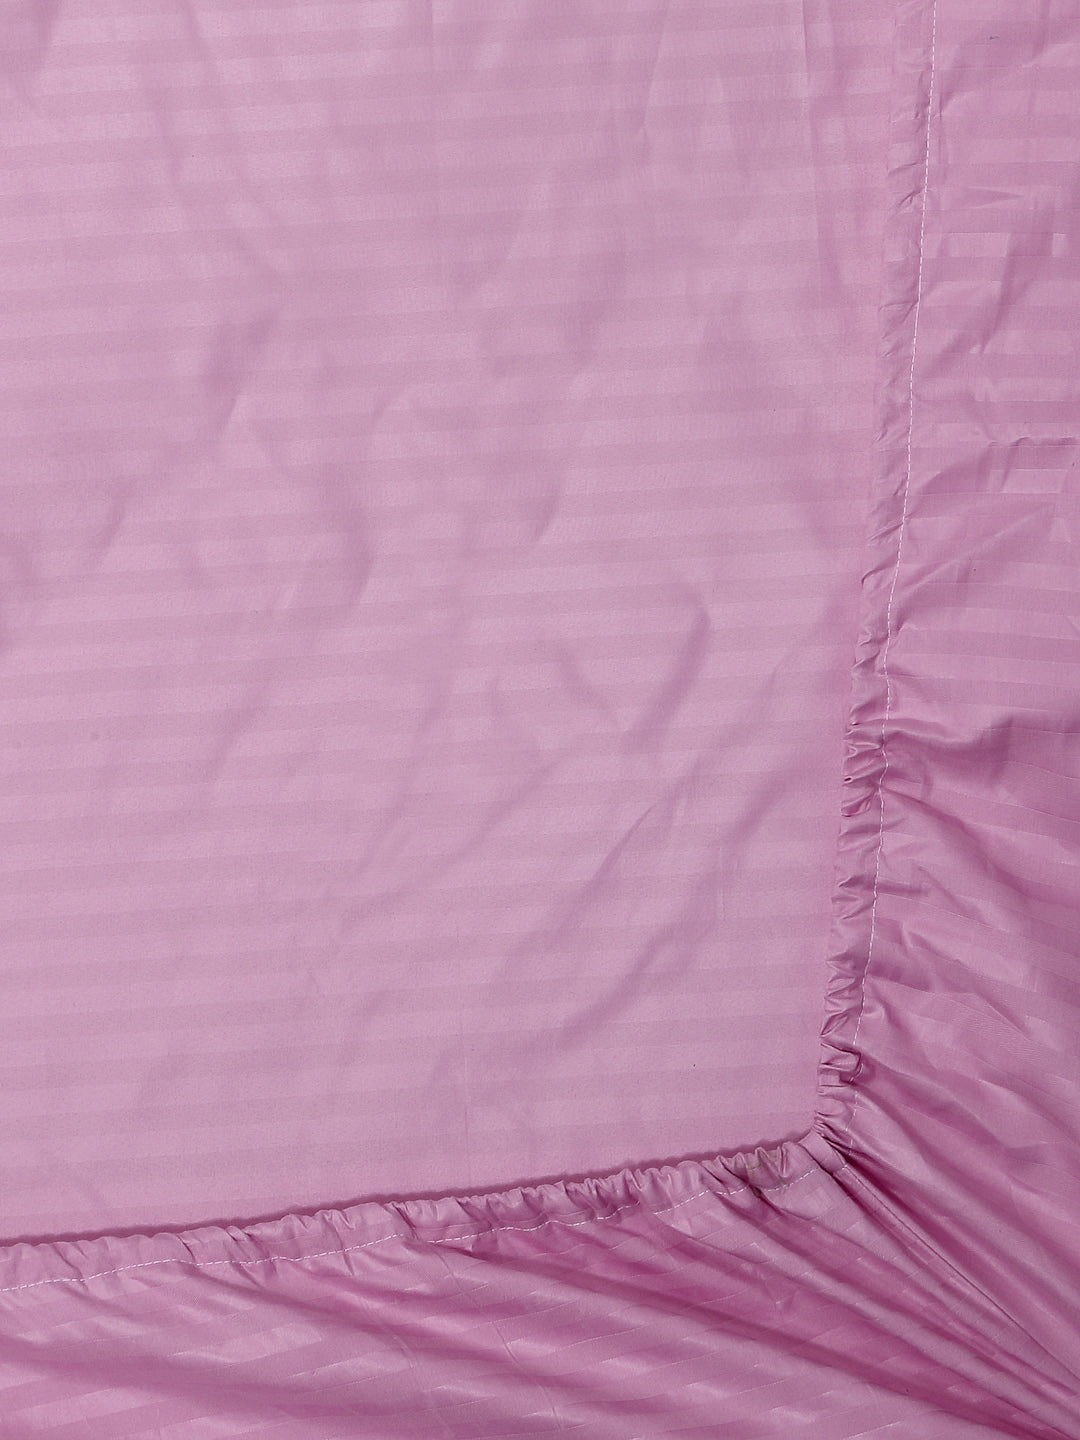 Klotthe Dark Pink Striped 300 TC Cotton Blend Elasticated Super King Double Bedsheet with 2 Pillow Covers (270X270 cm)